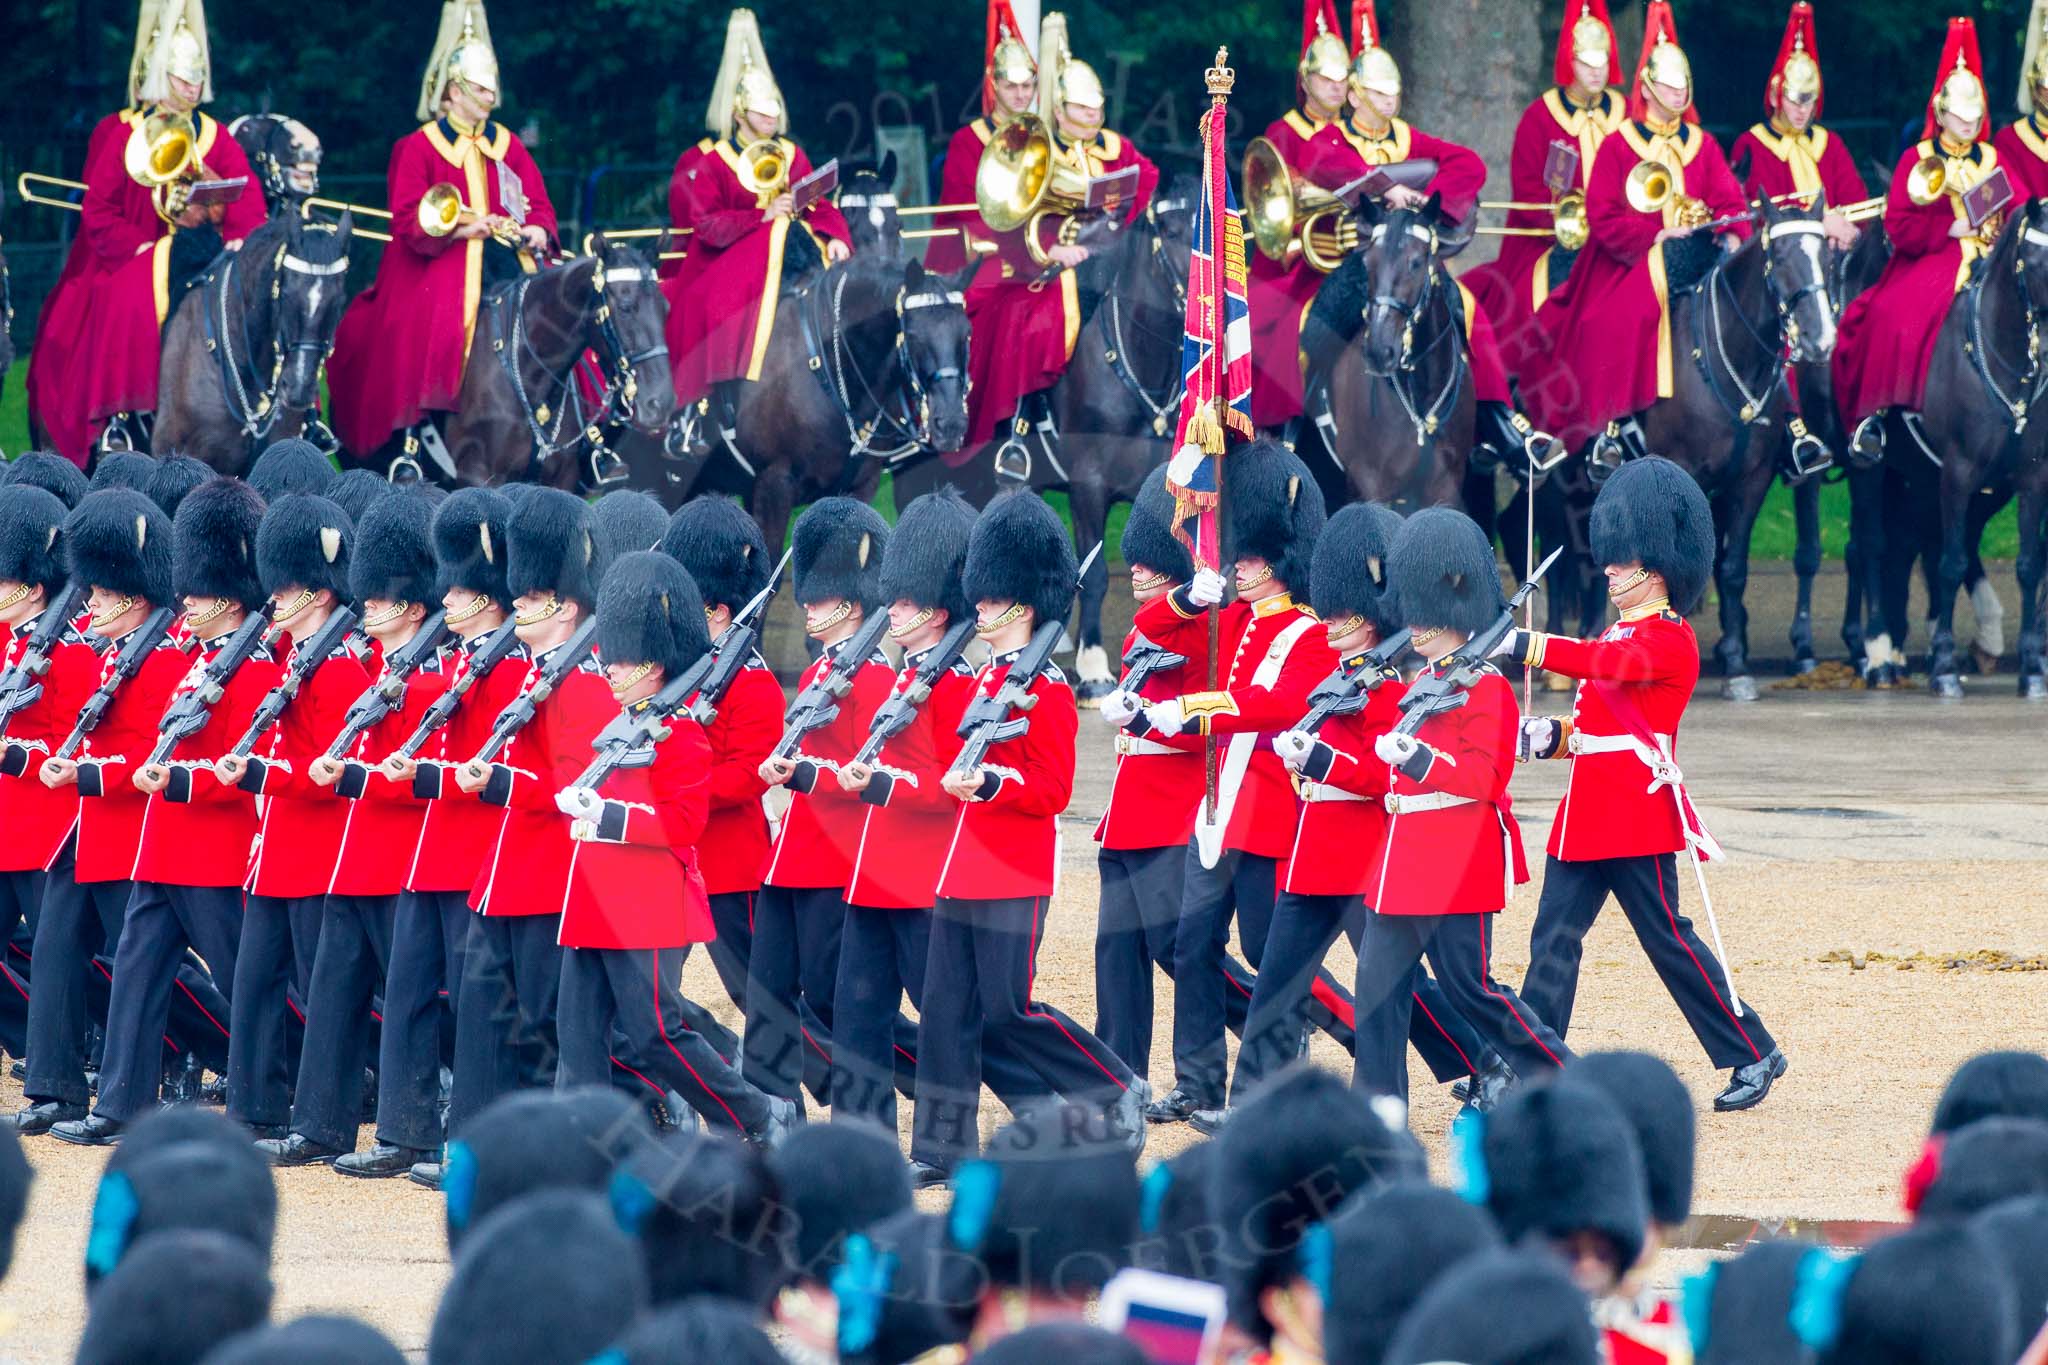 The Colonel's Review 2014.
Horse Guards Parade, Westminster,
London,

United Kingdom,
on 07 June 2014 at 11:47, image #563